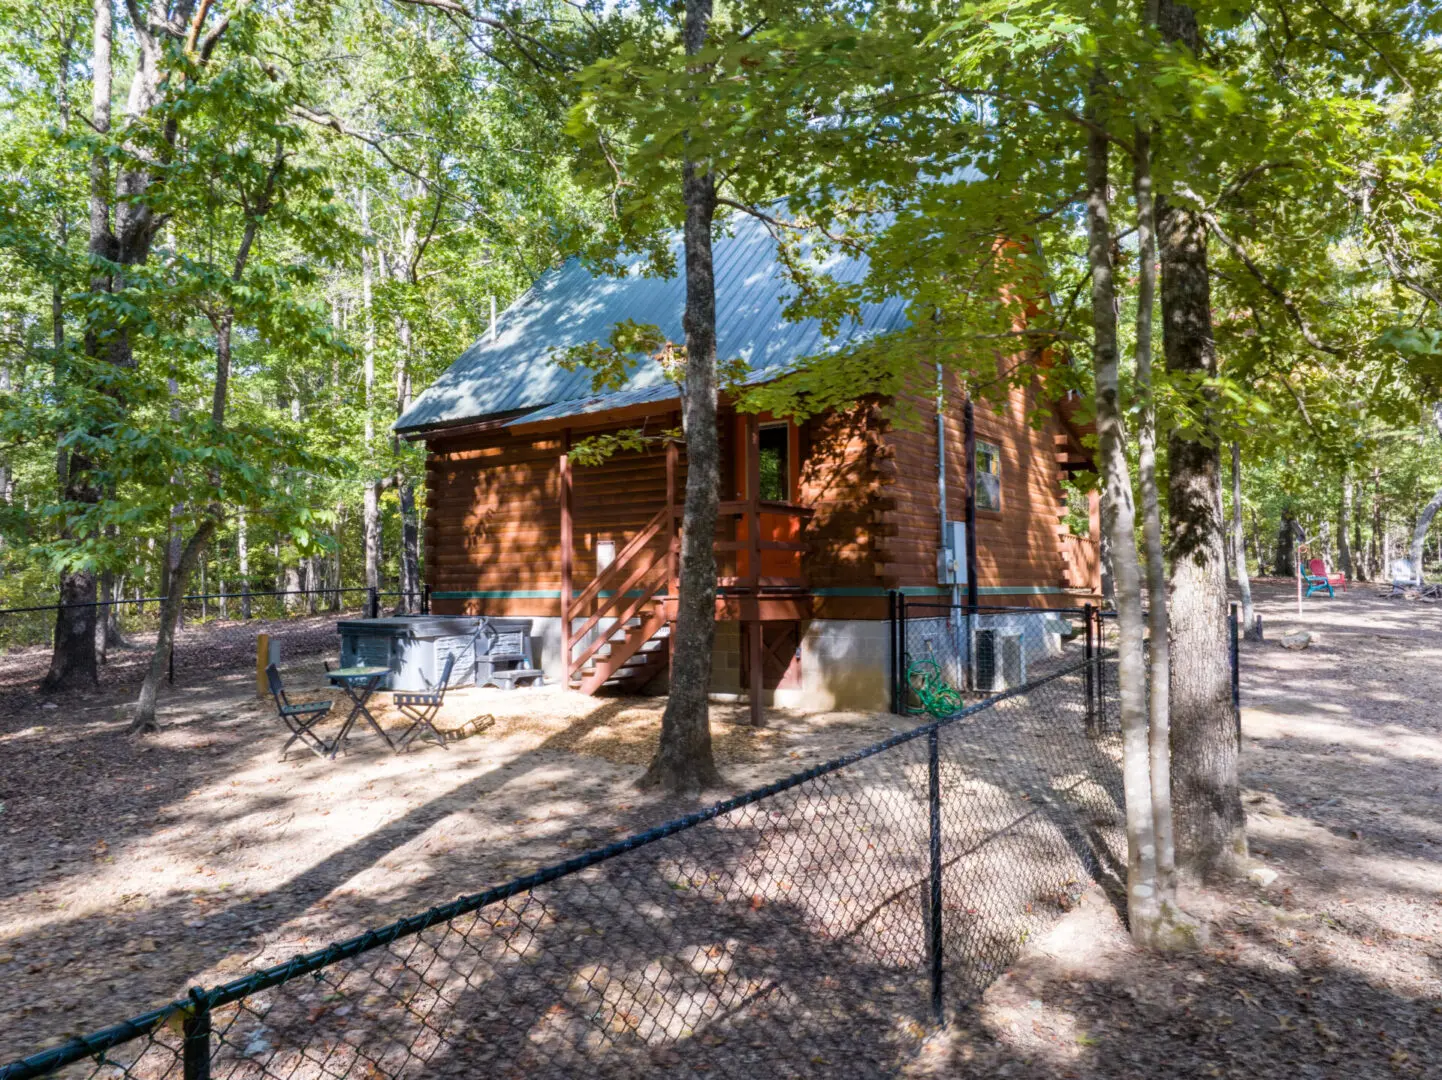 A cabin surrounded by trees in the woods.